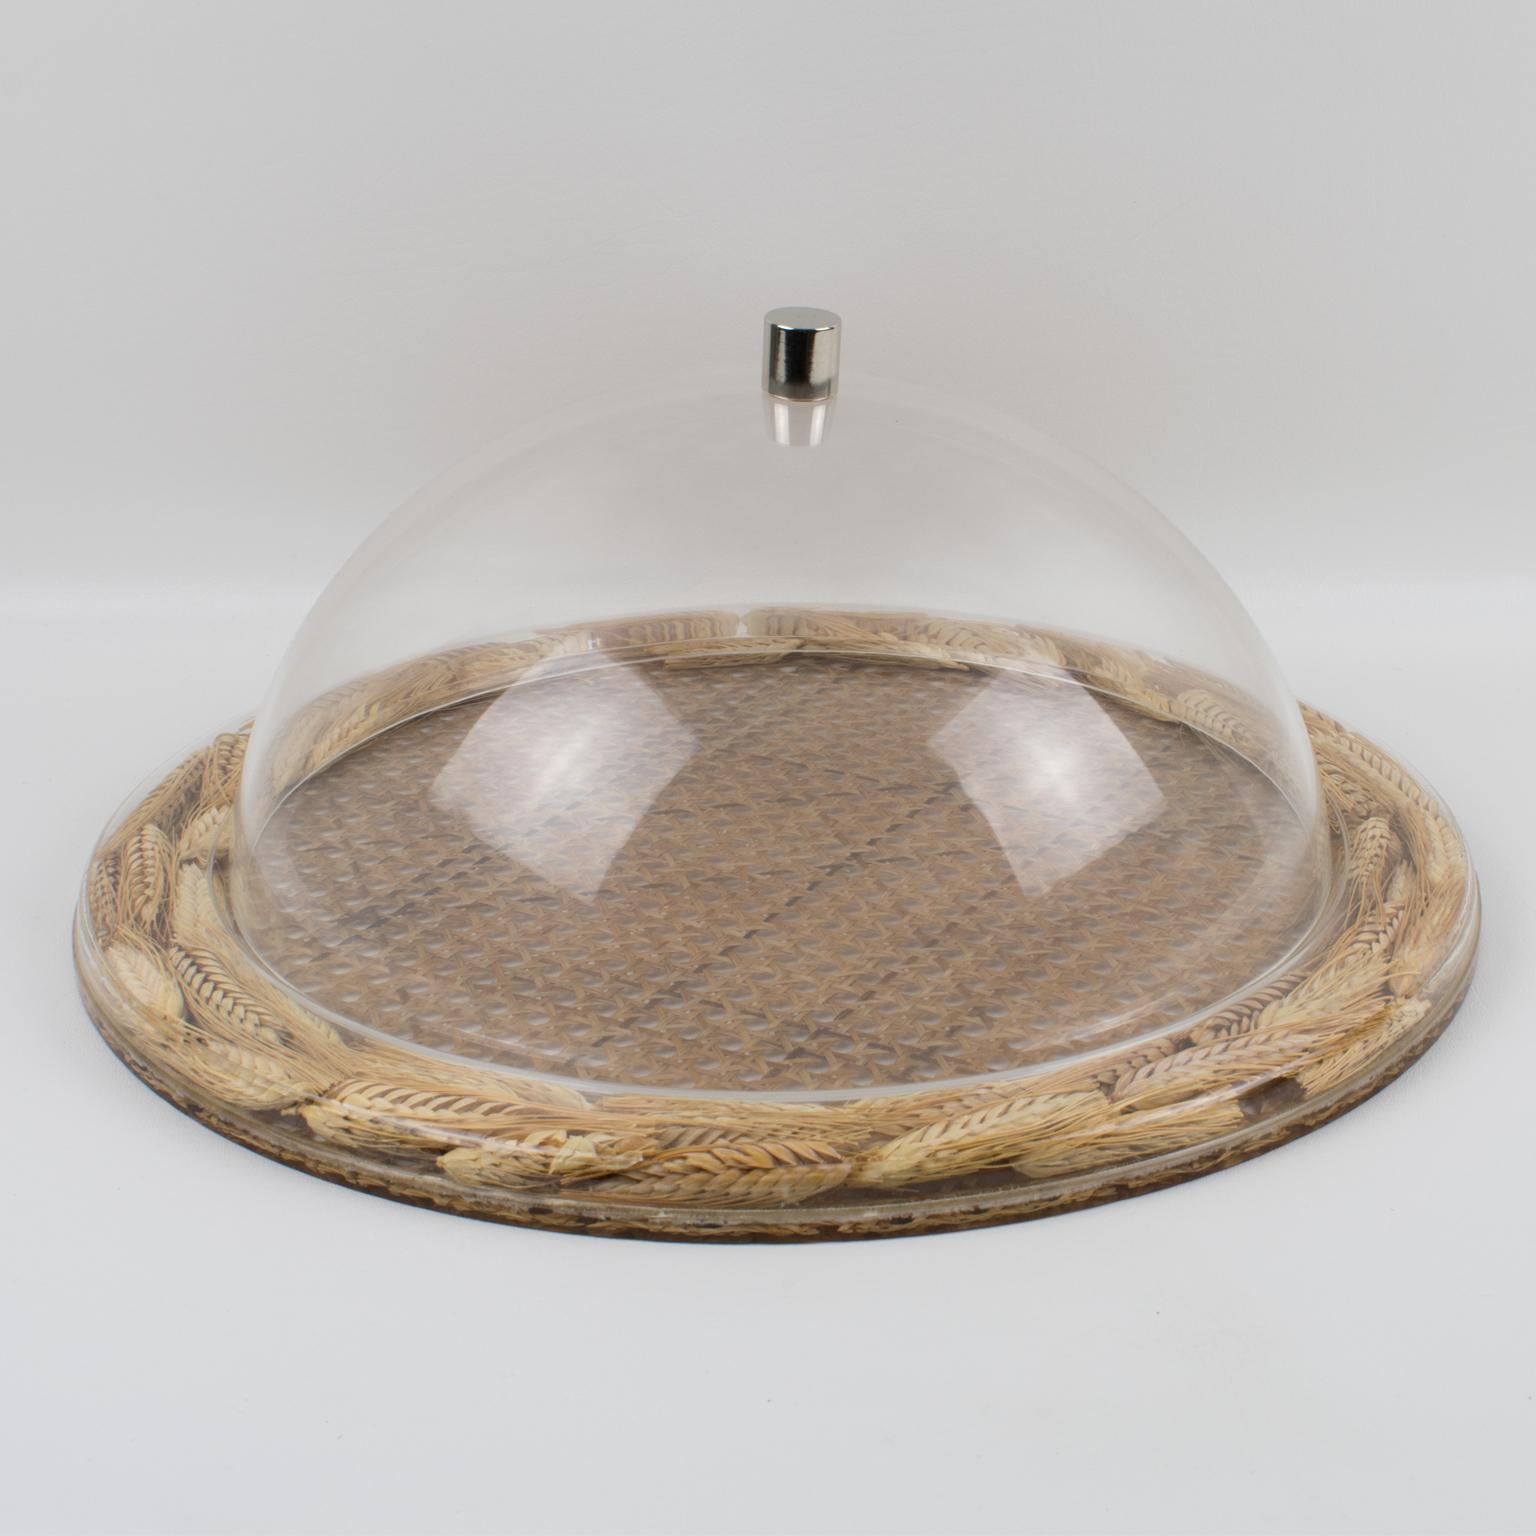 This is a very special and unique serving tray, designed by Christian Dior in the 1970s for his Home Collection. This board or platter has a rounded shape with raised edges. Made of clear Lucite or Plexiglass with real wheat and rattan cane work